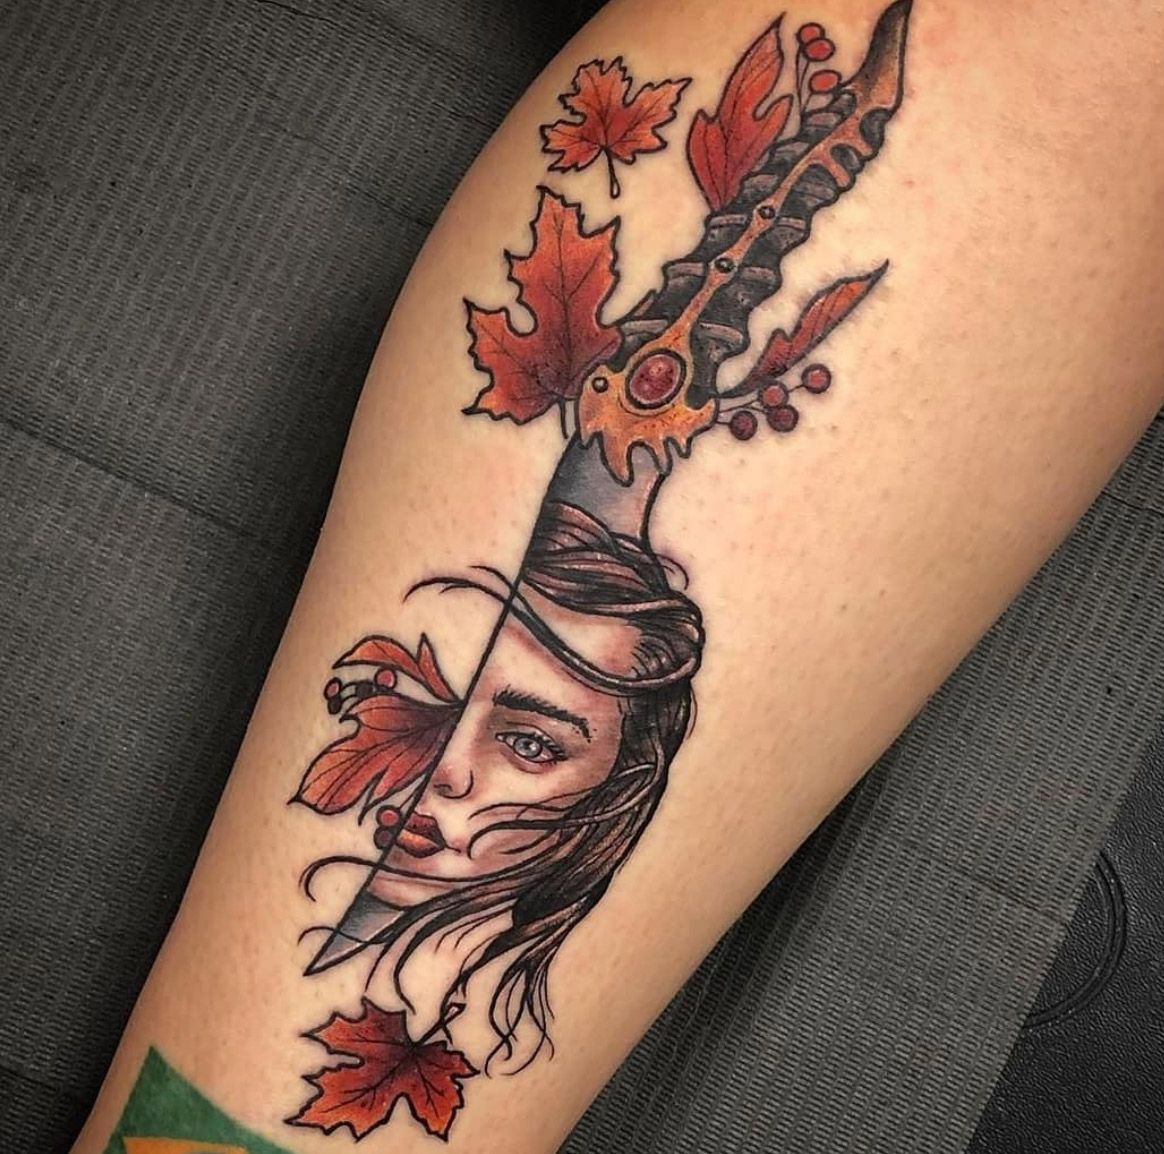 POV: You get the Cherry Blossom Spine Tattoo you have been planning on... |  TikTok